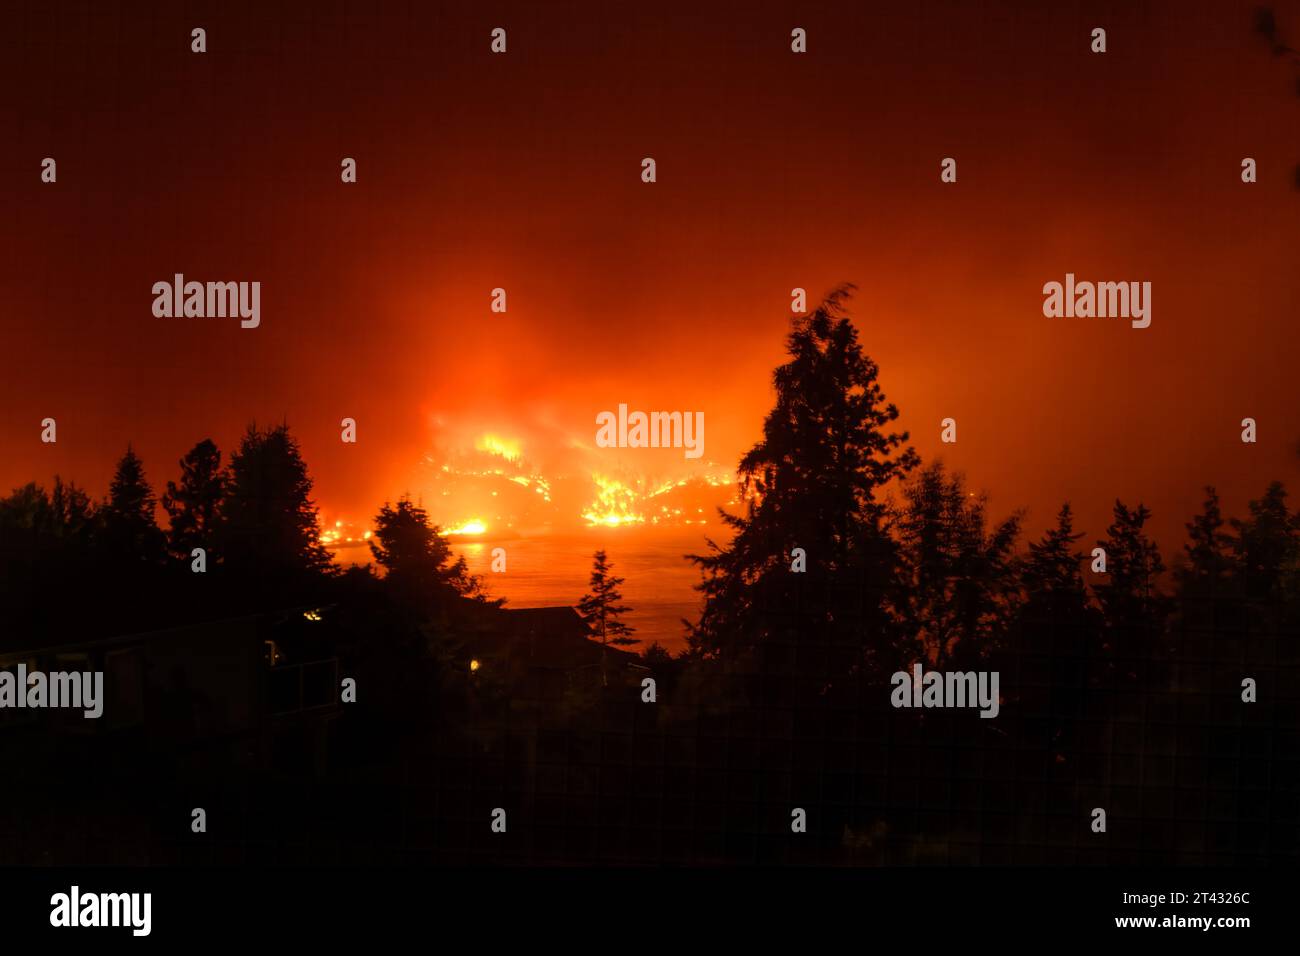 Silhouette of a forest and forest fire in summer, Kelowna, Okanagan Valley, British Columbia, Canada Stock Photo